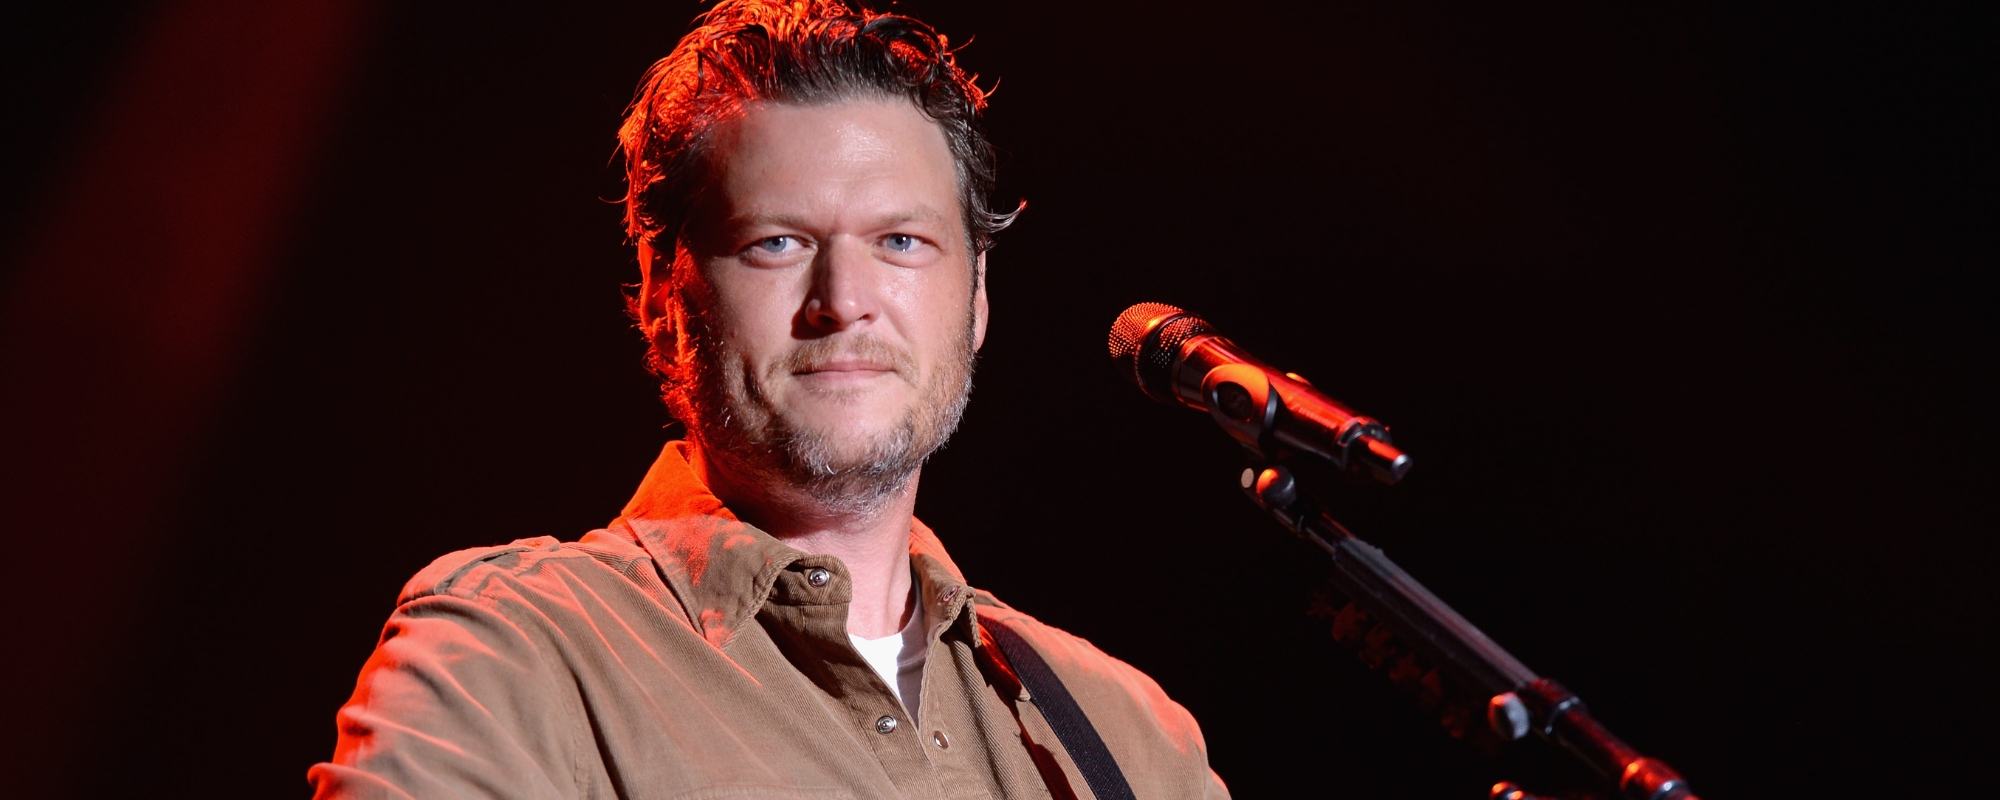 Blake Shelton Leaves Fans Shook With Tear-Jerking Performance of Song He Retired “Years and Years Ago”